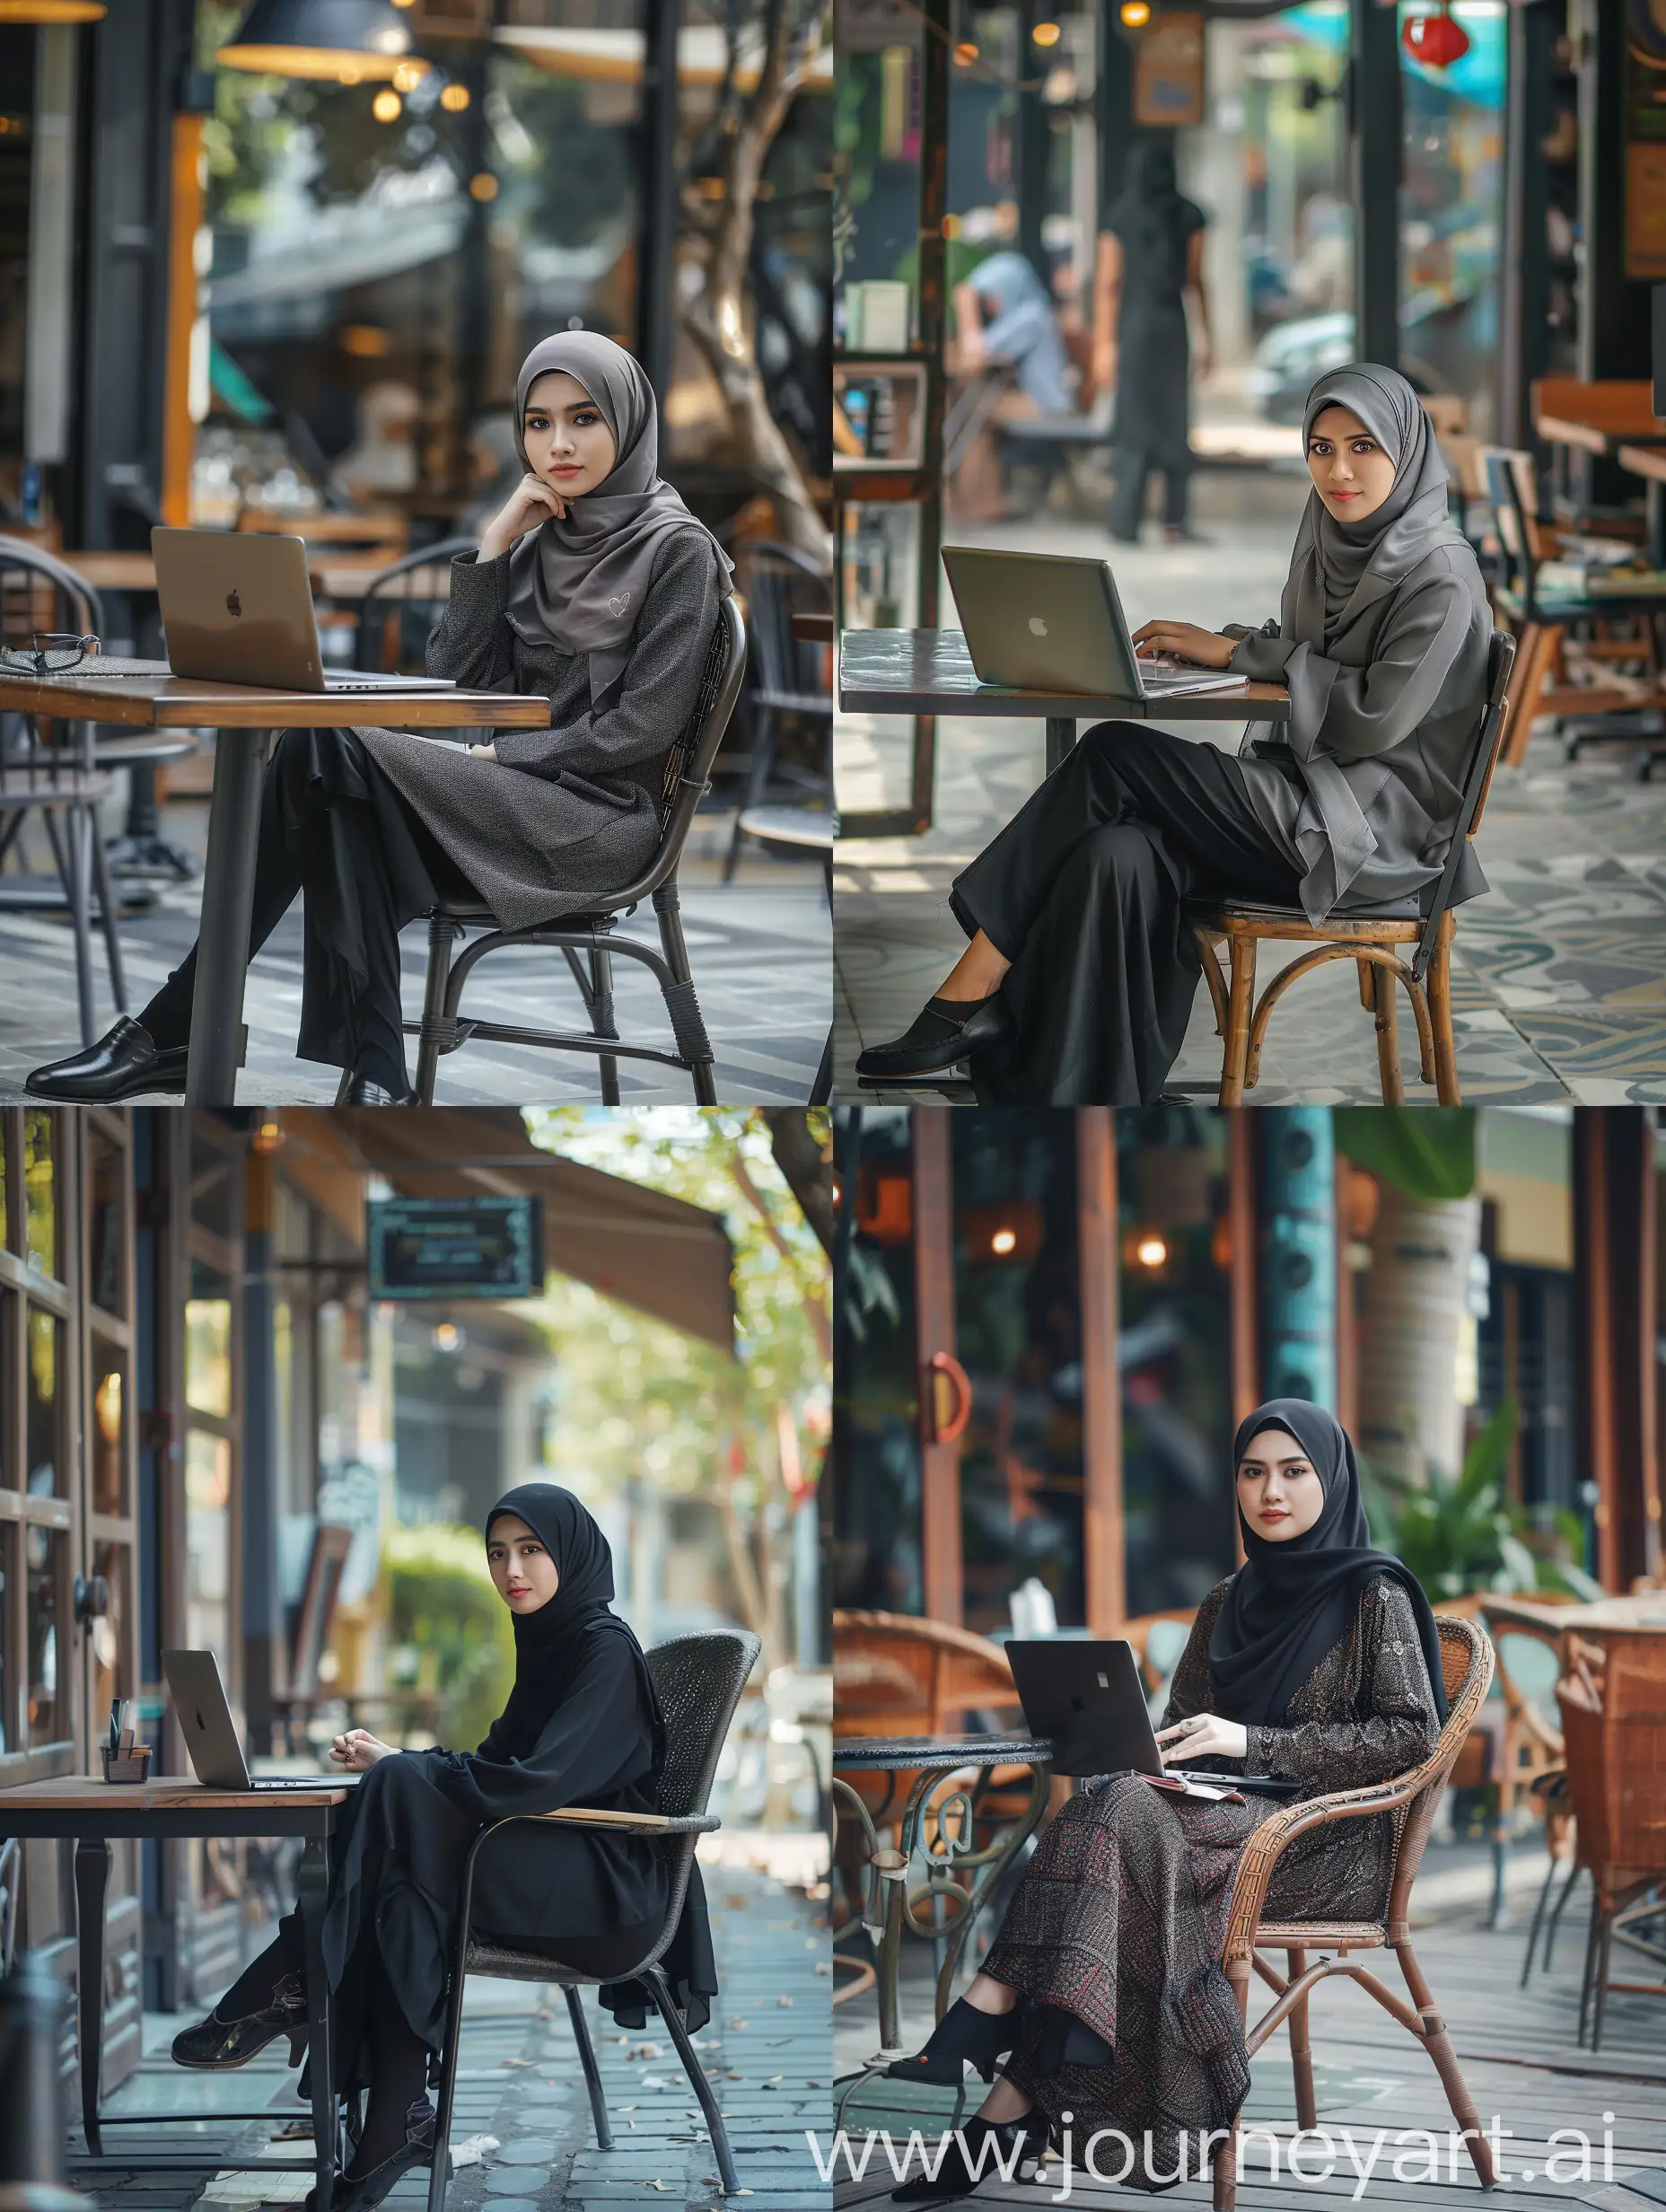 Indonesian-Woman-in-Hijab-Sitting-at-Outdoor-Cafe-with-Laptop